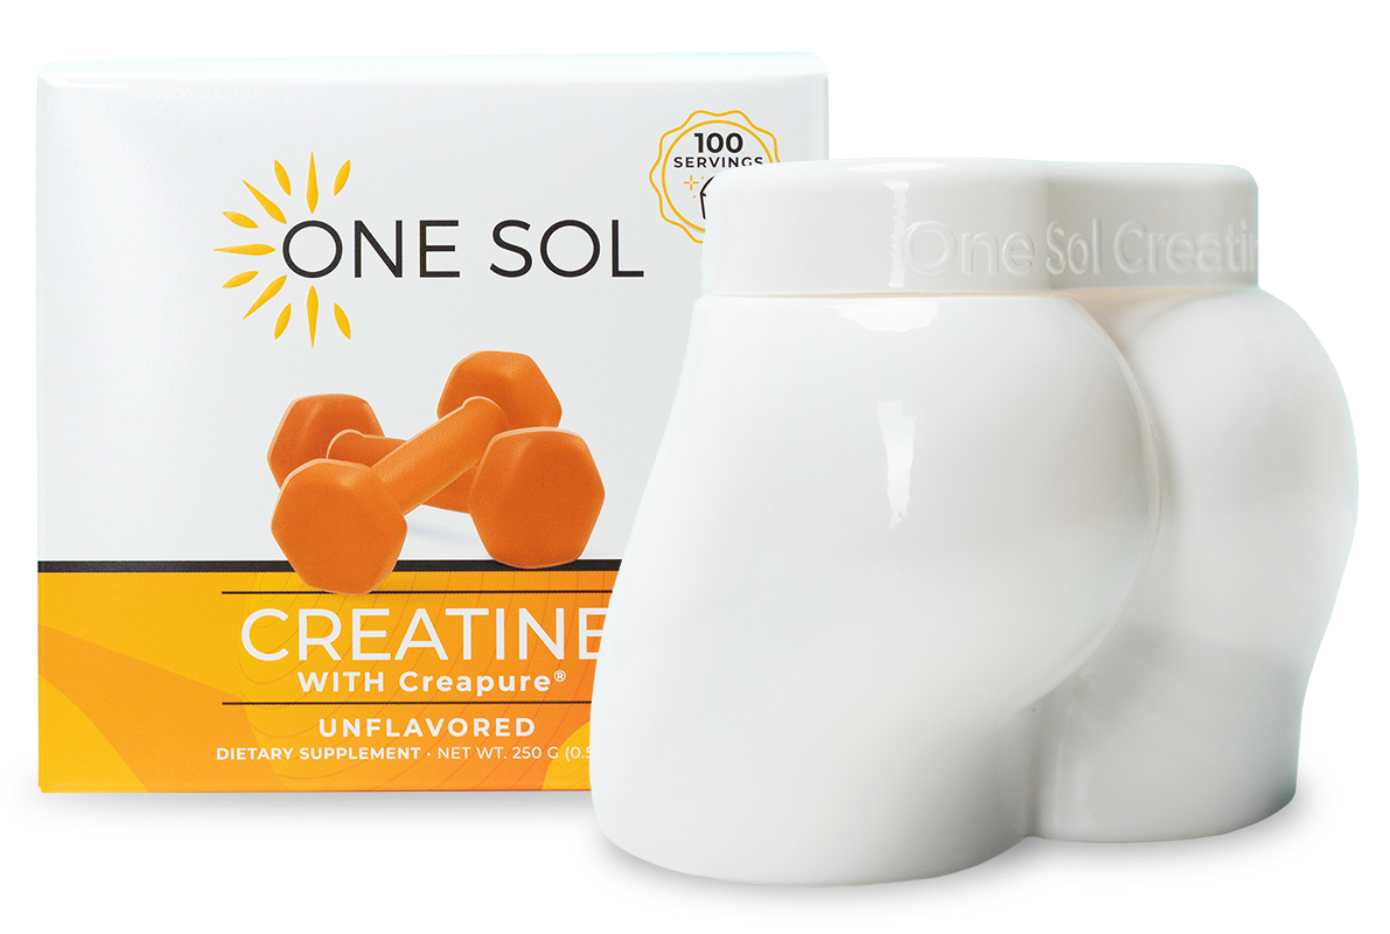  One Sol Creatine for Women Booty Gain, All Natural